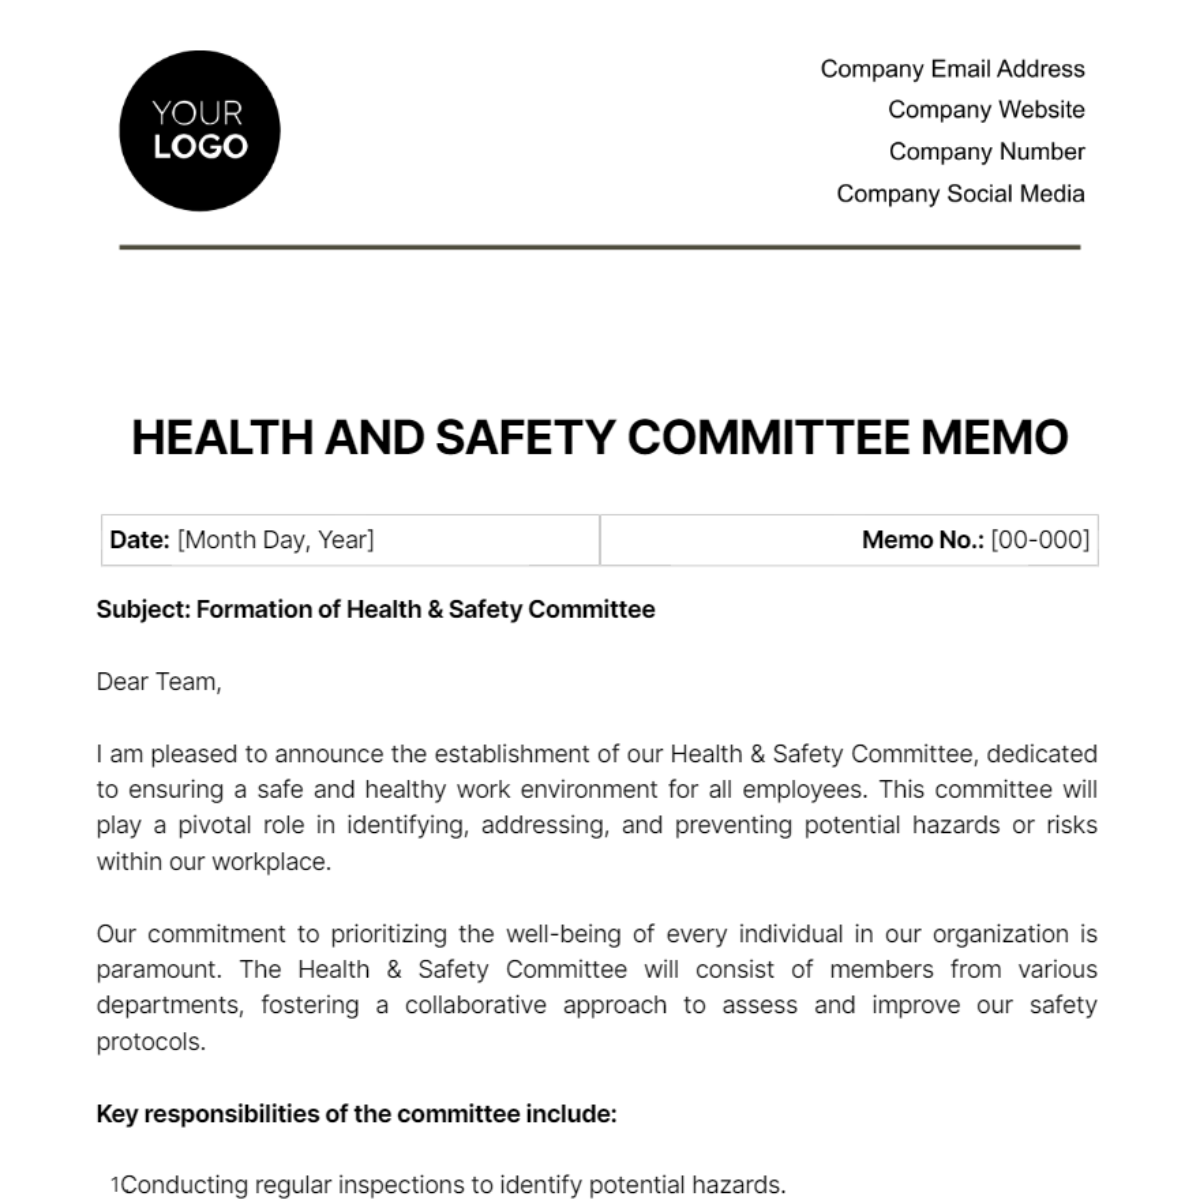 Free Health & Safety Committee Memo Template